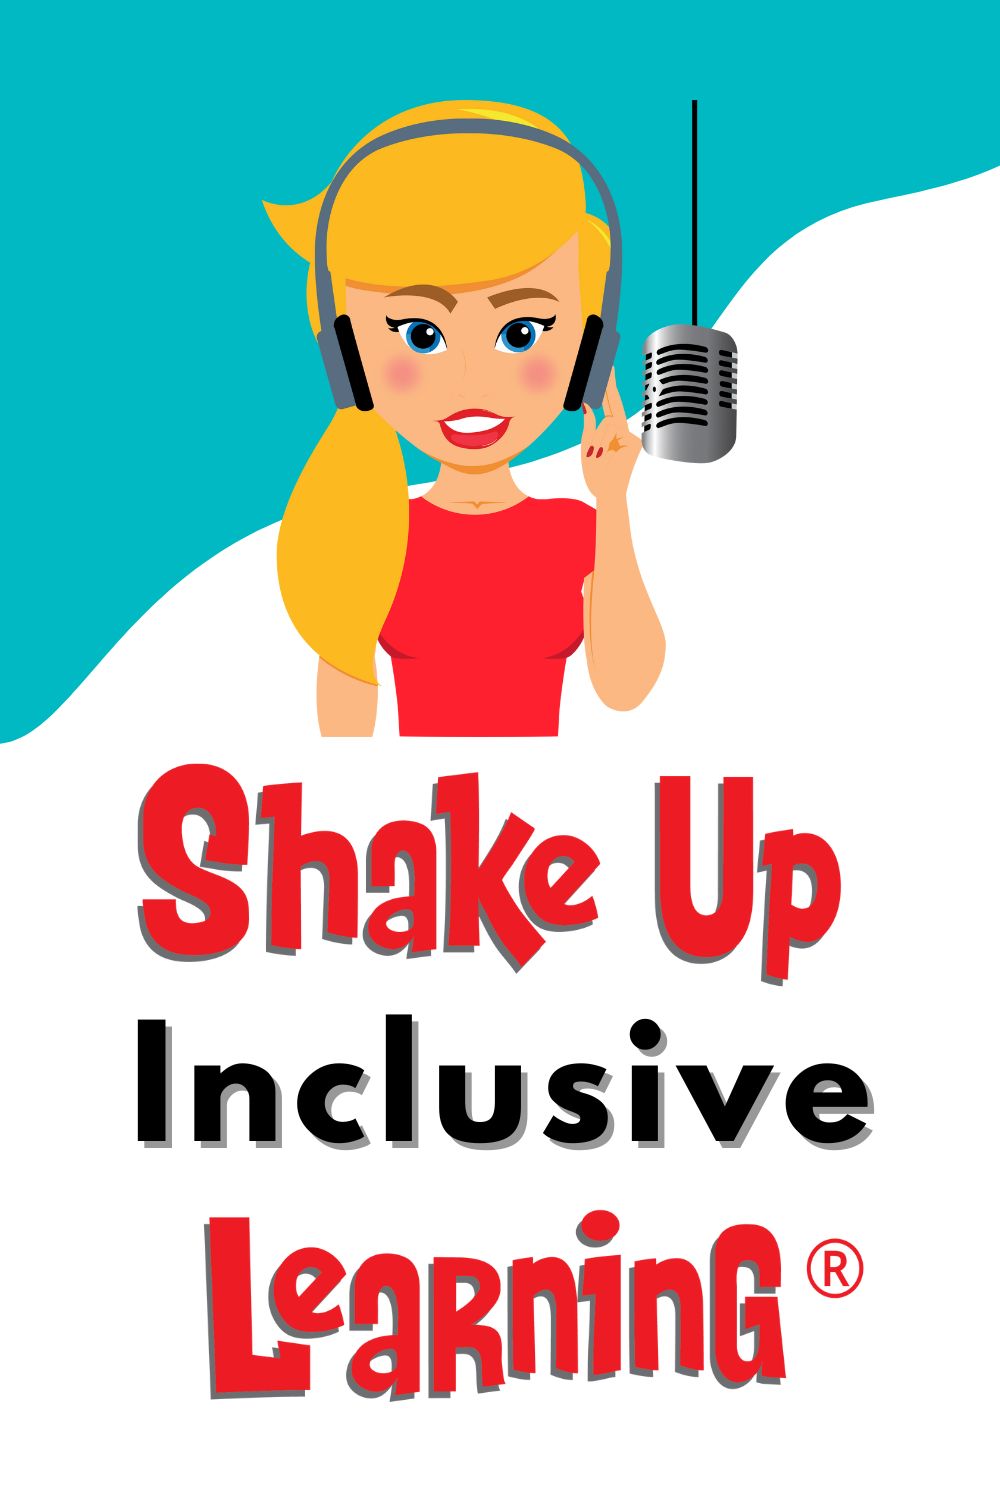 Fighting Exclusion: Shake Up Inclusive Learning –
SULS0164